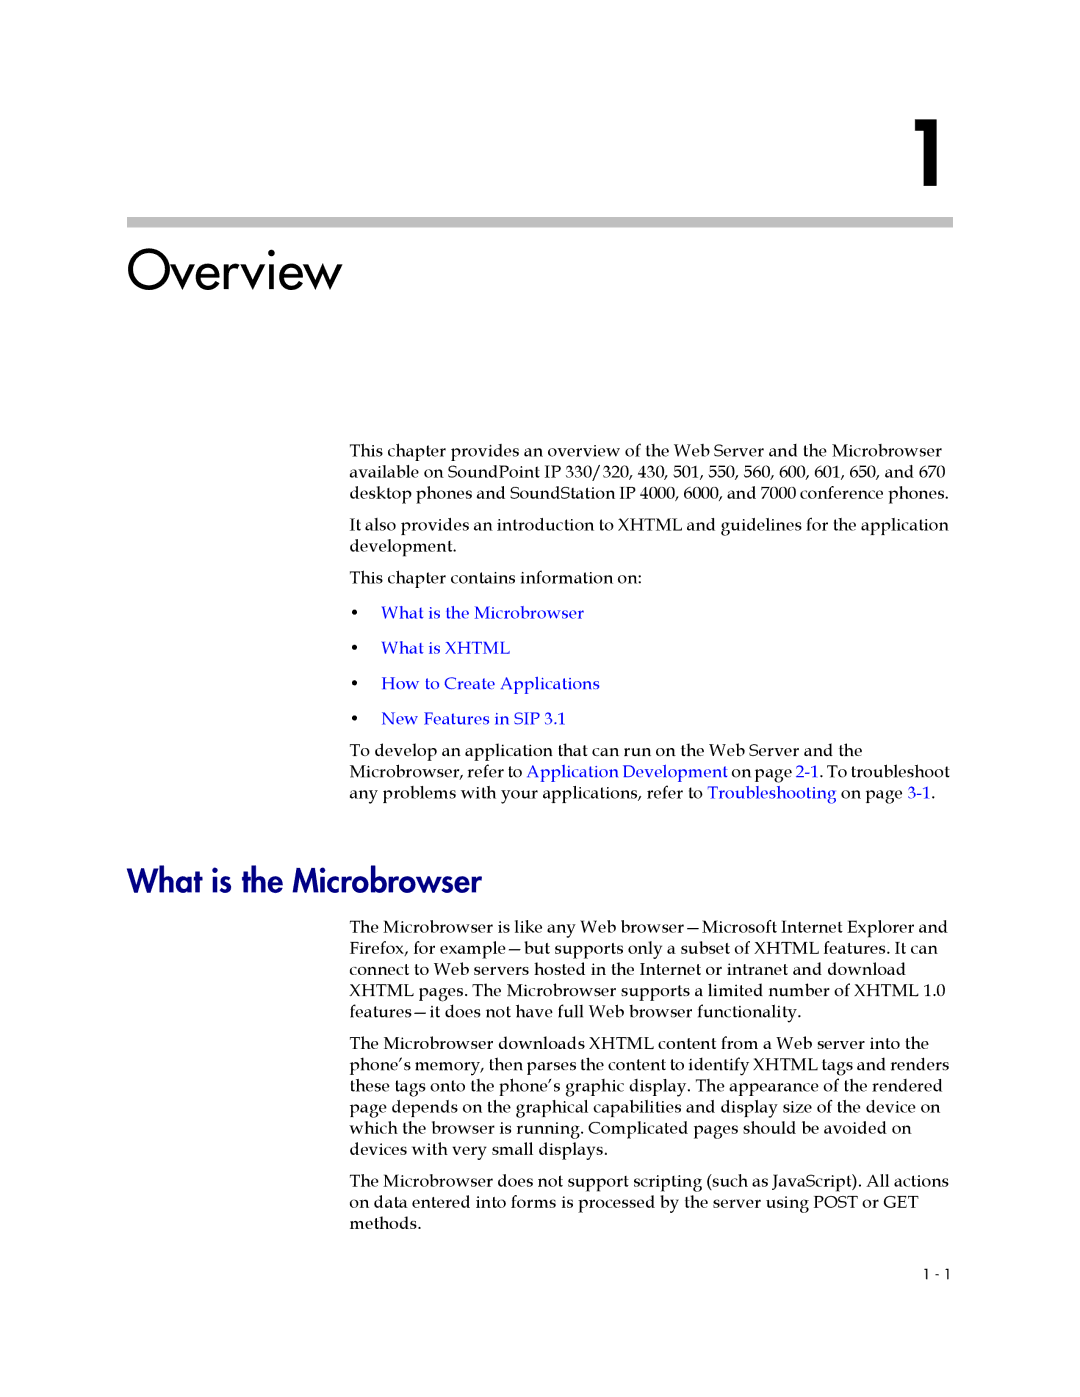 Polycom SIP 3.1 manual Overview, What is the Microbrowser 